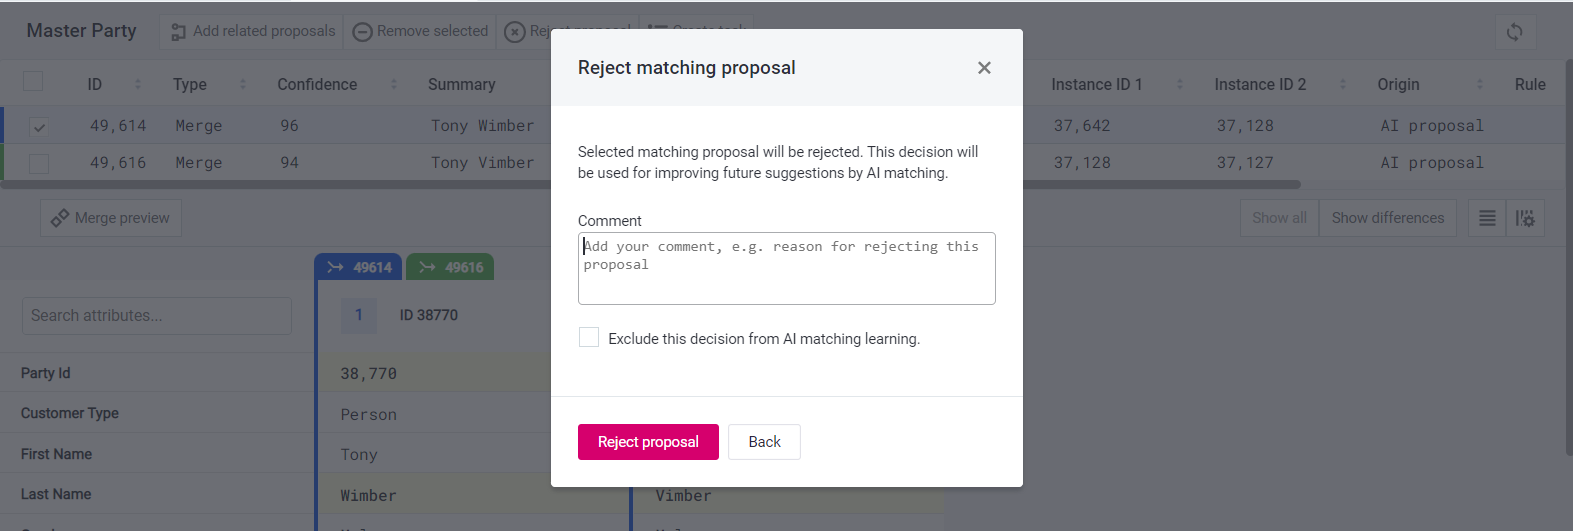 Reject matching proposal window